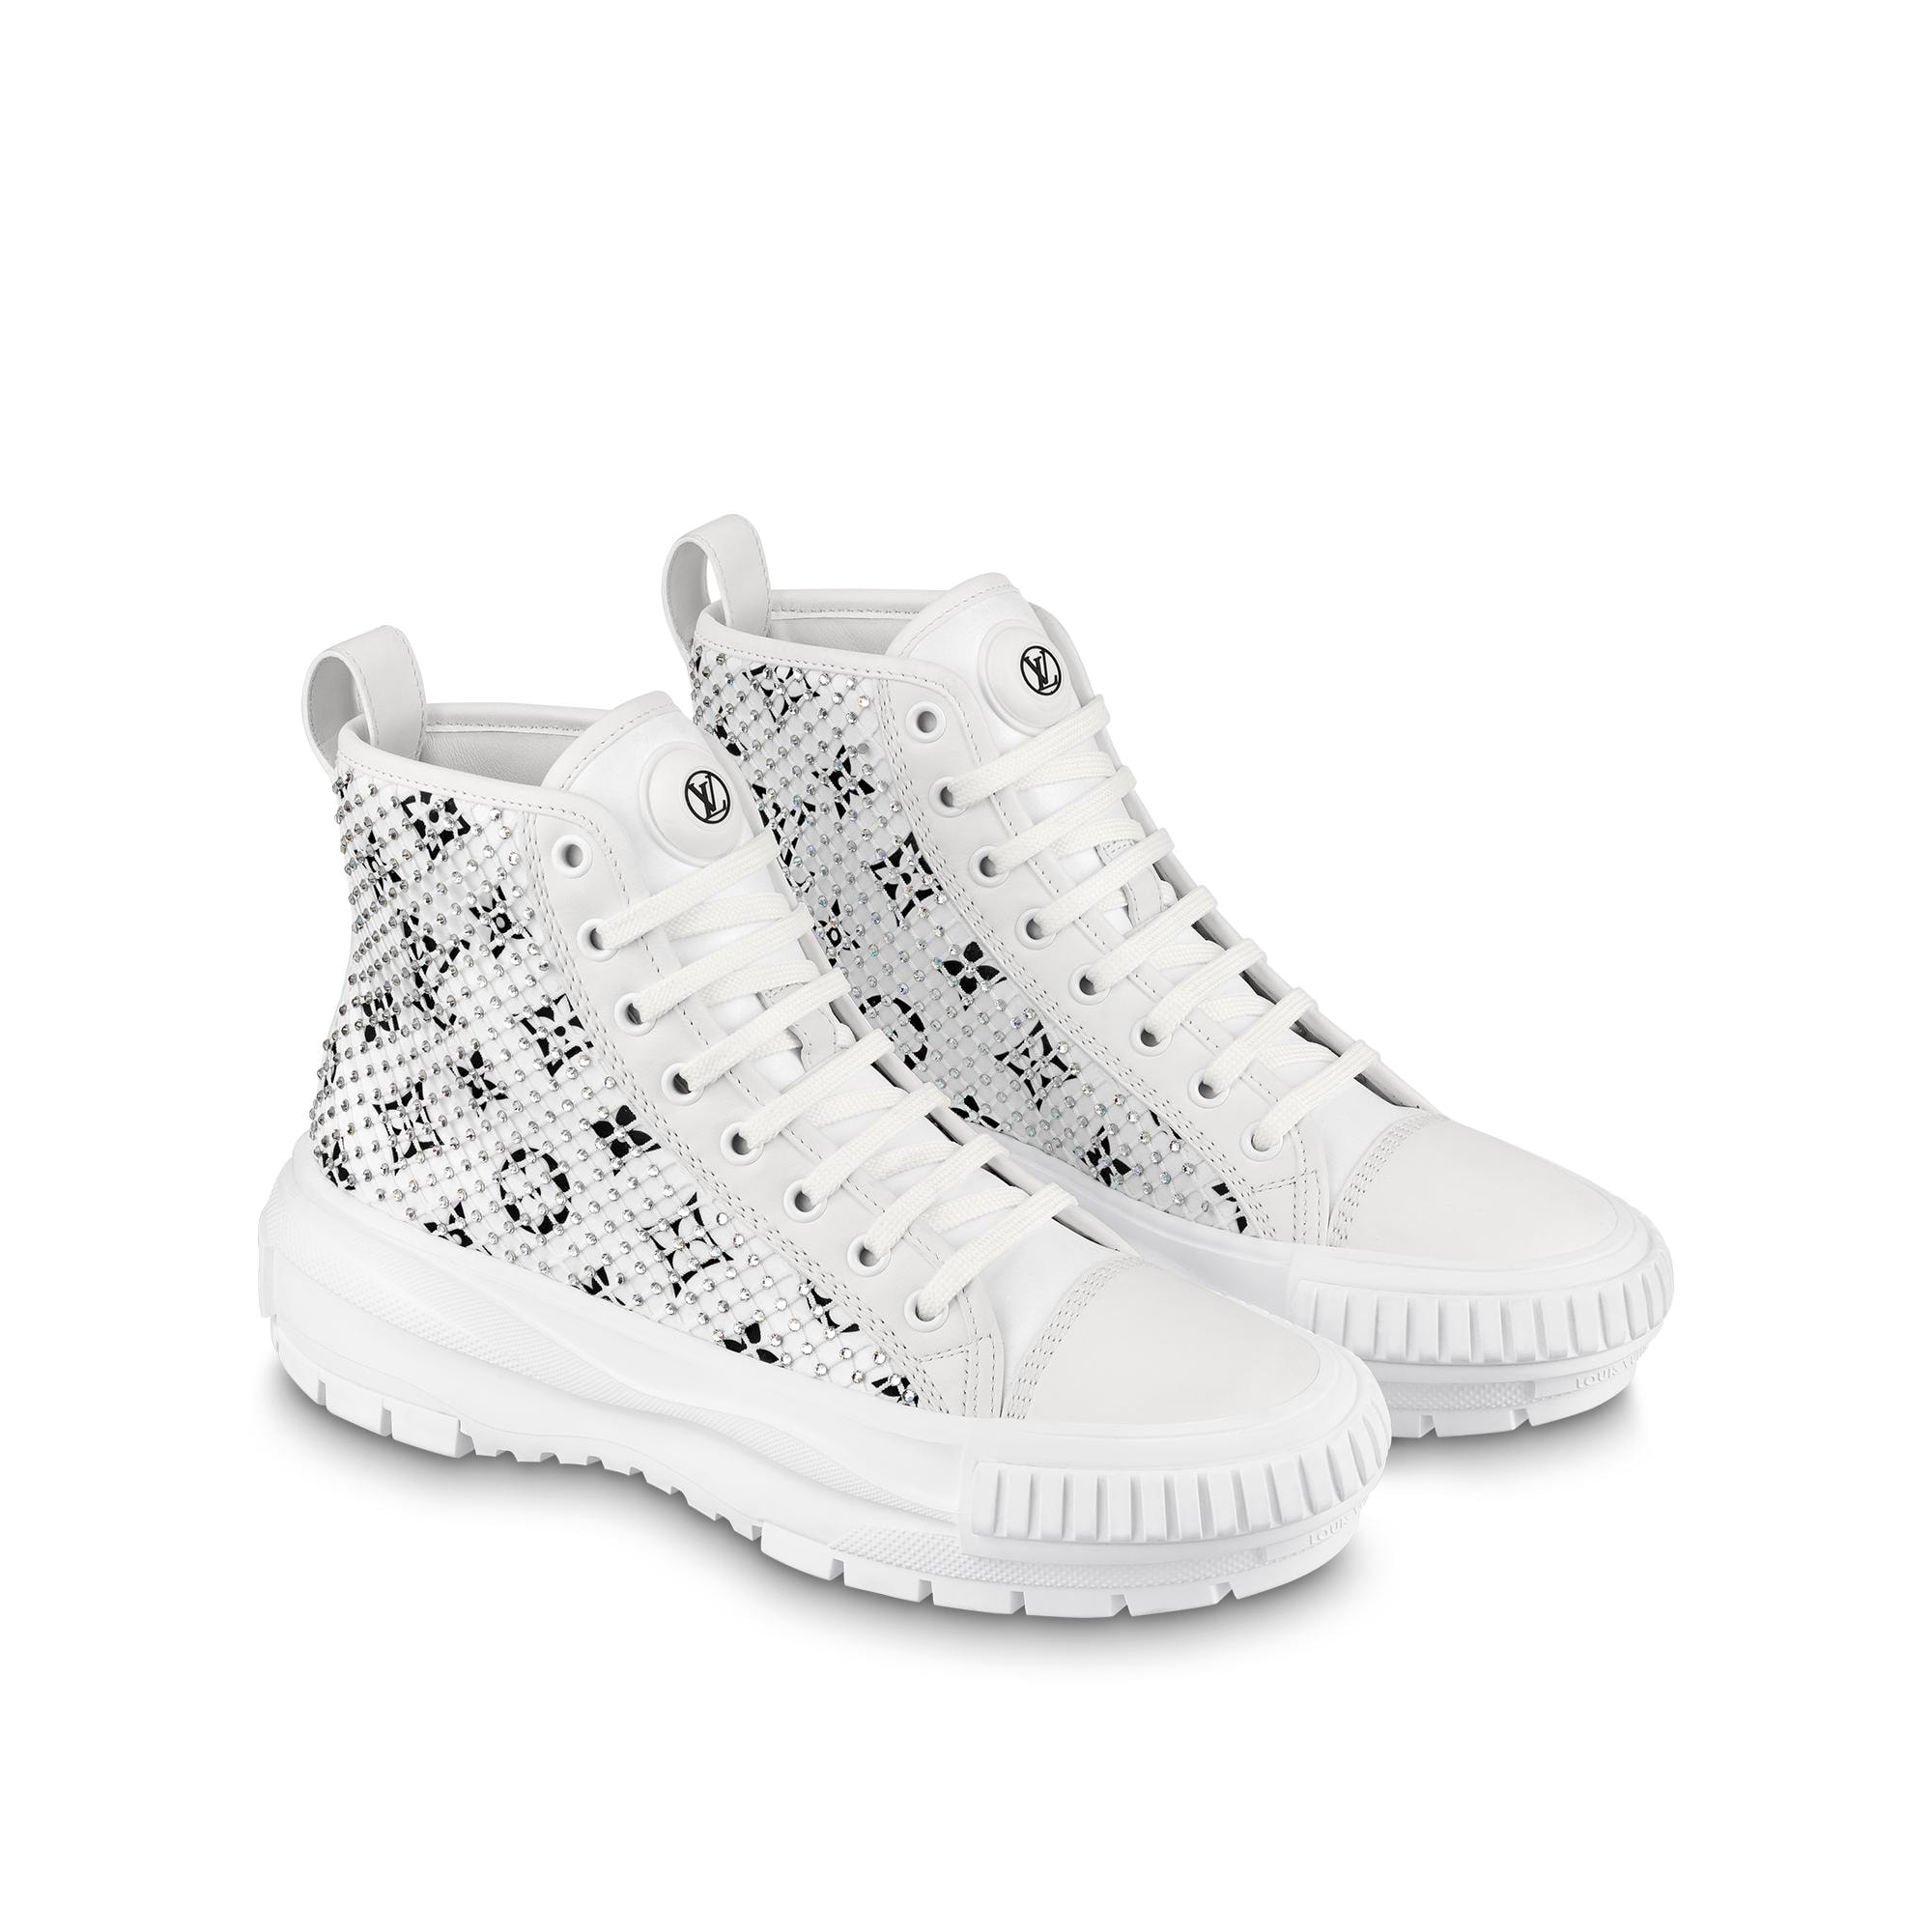 LOUIS VUITTON LOUIS VUITTON Squad Rhinestone Sneakers shoes leather White  Used Women #41